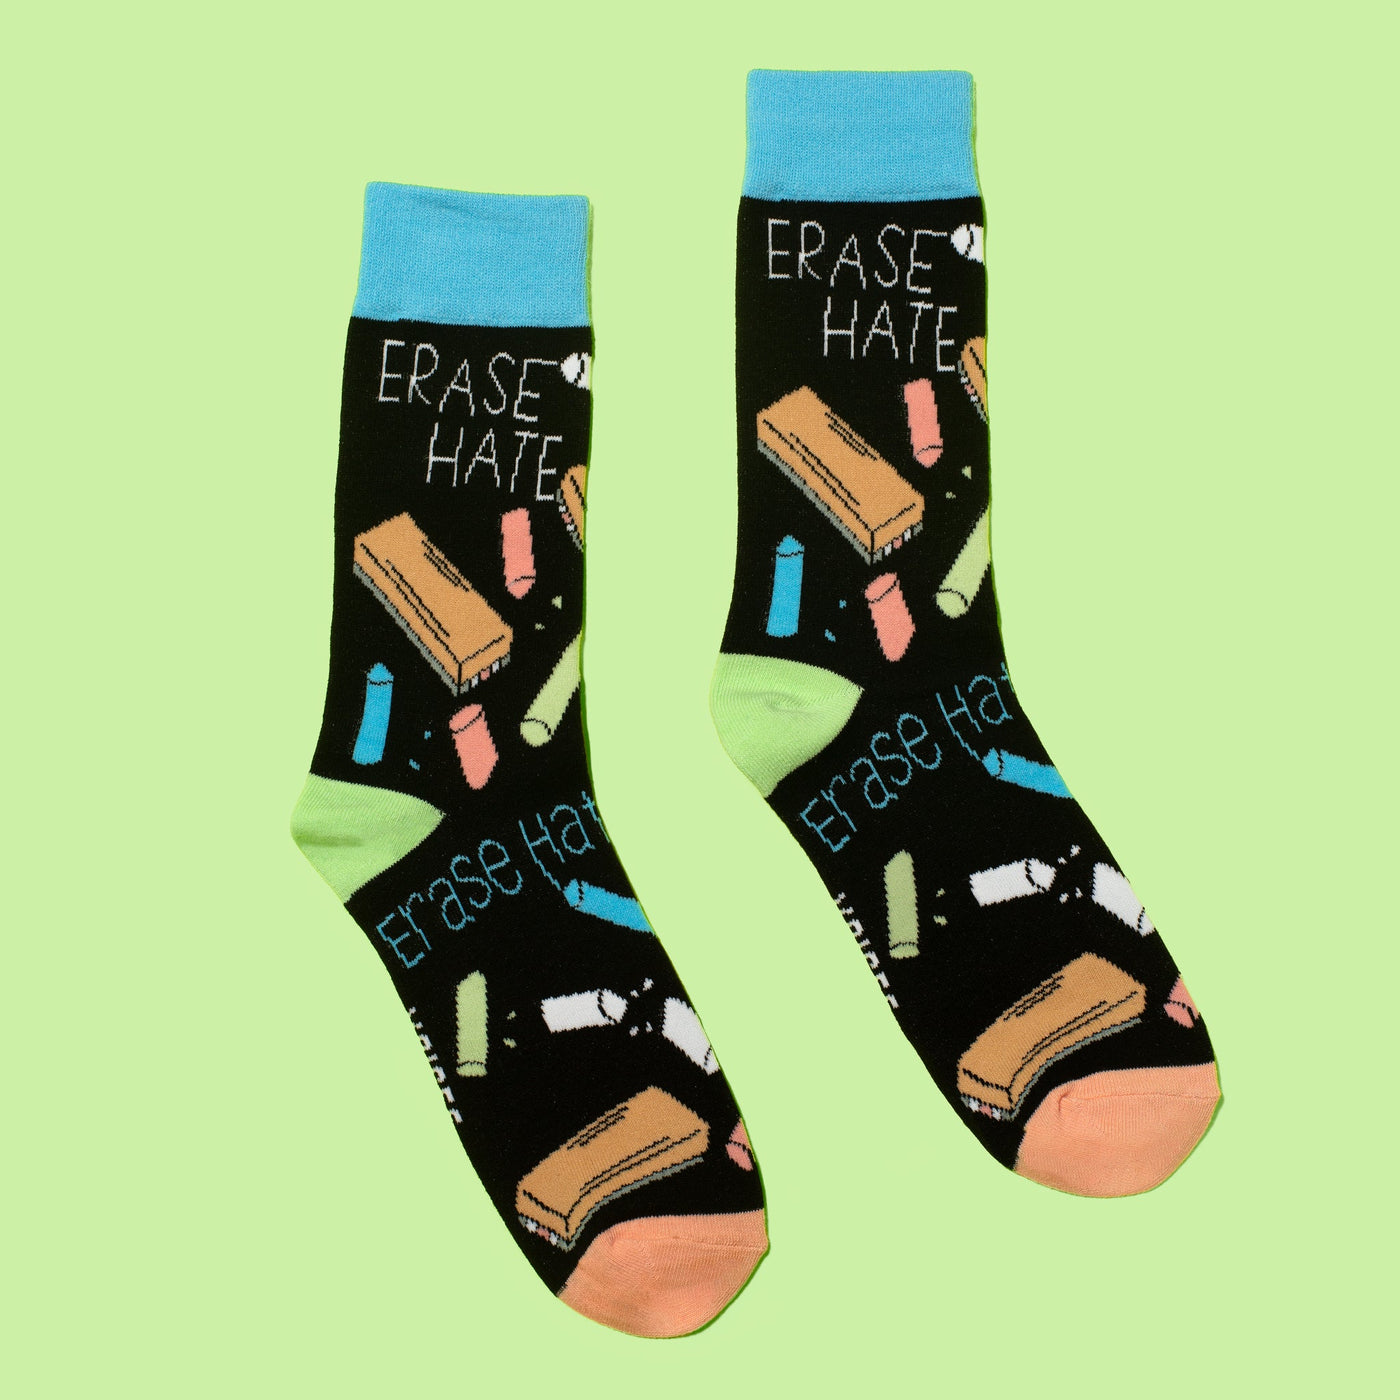 "Erase Hate" Cotton Crew Socks by Main & Local